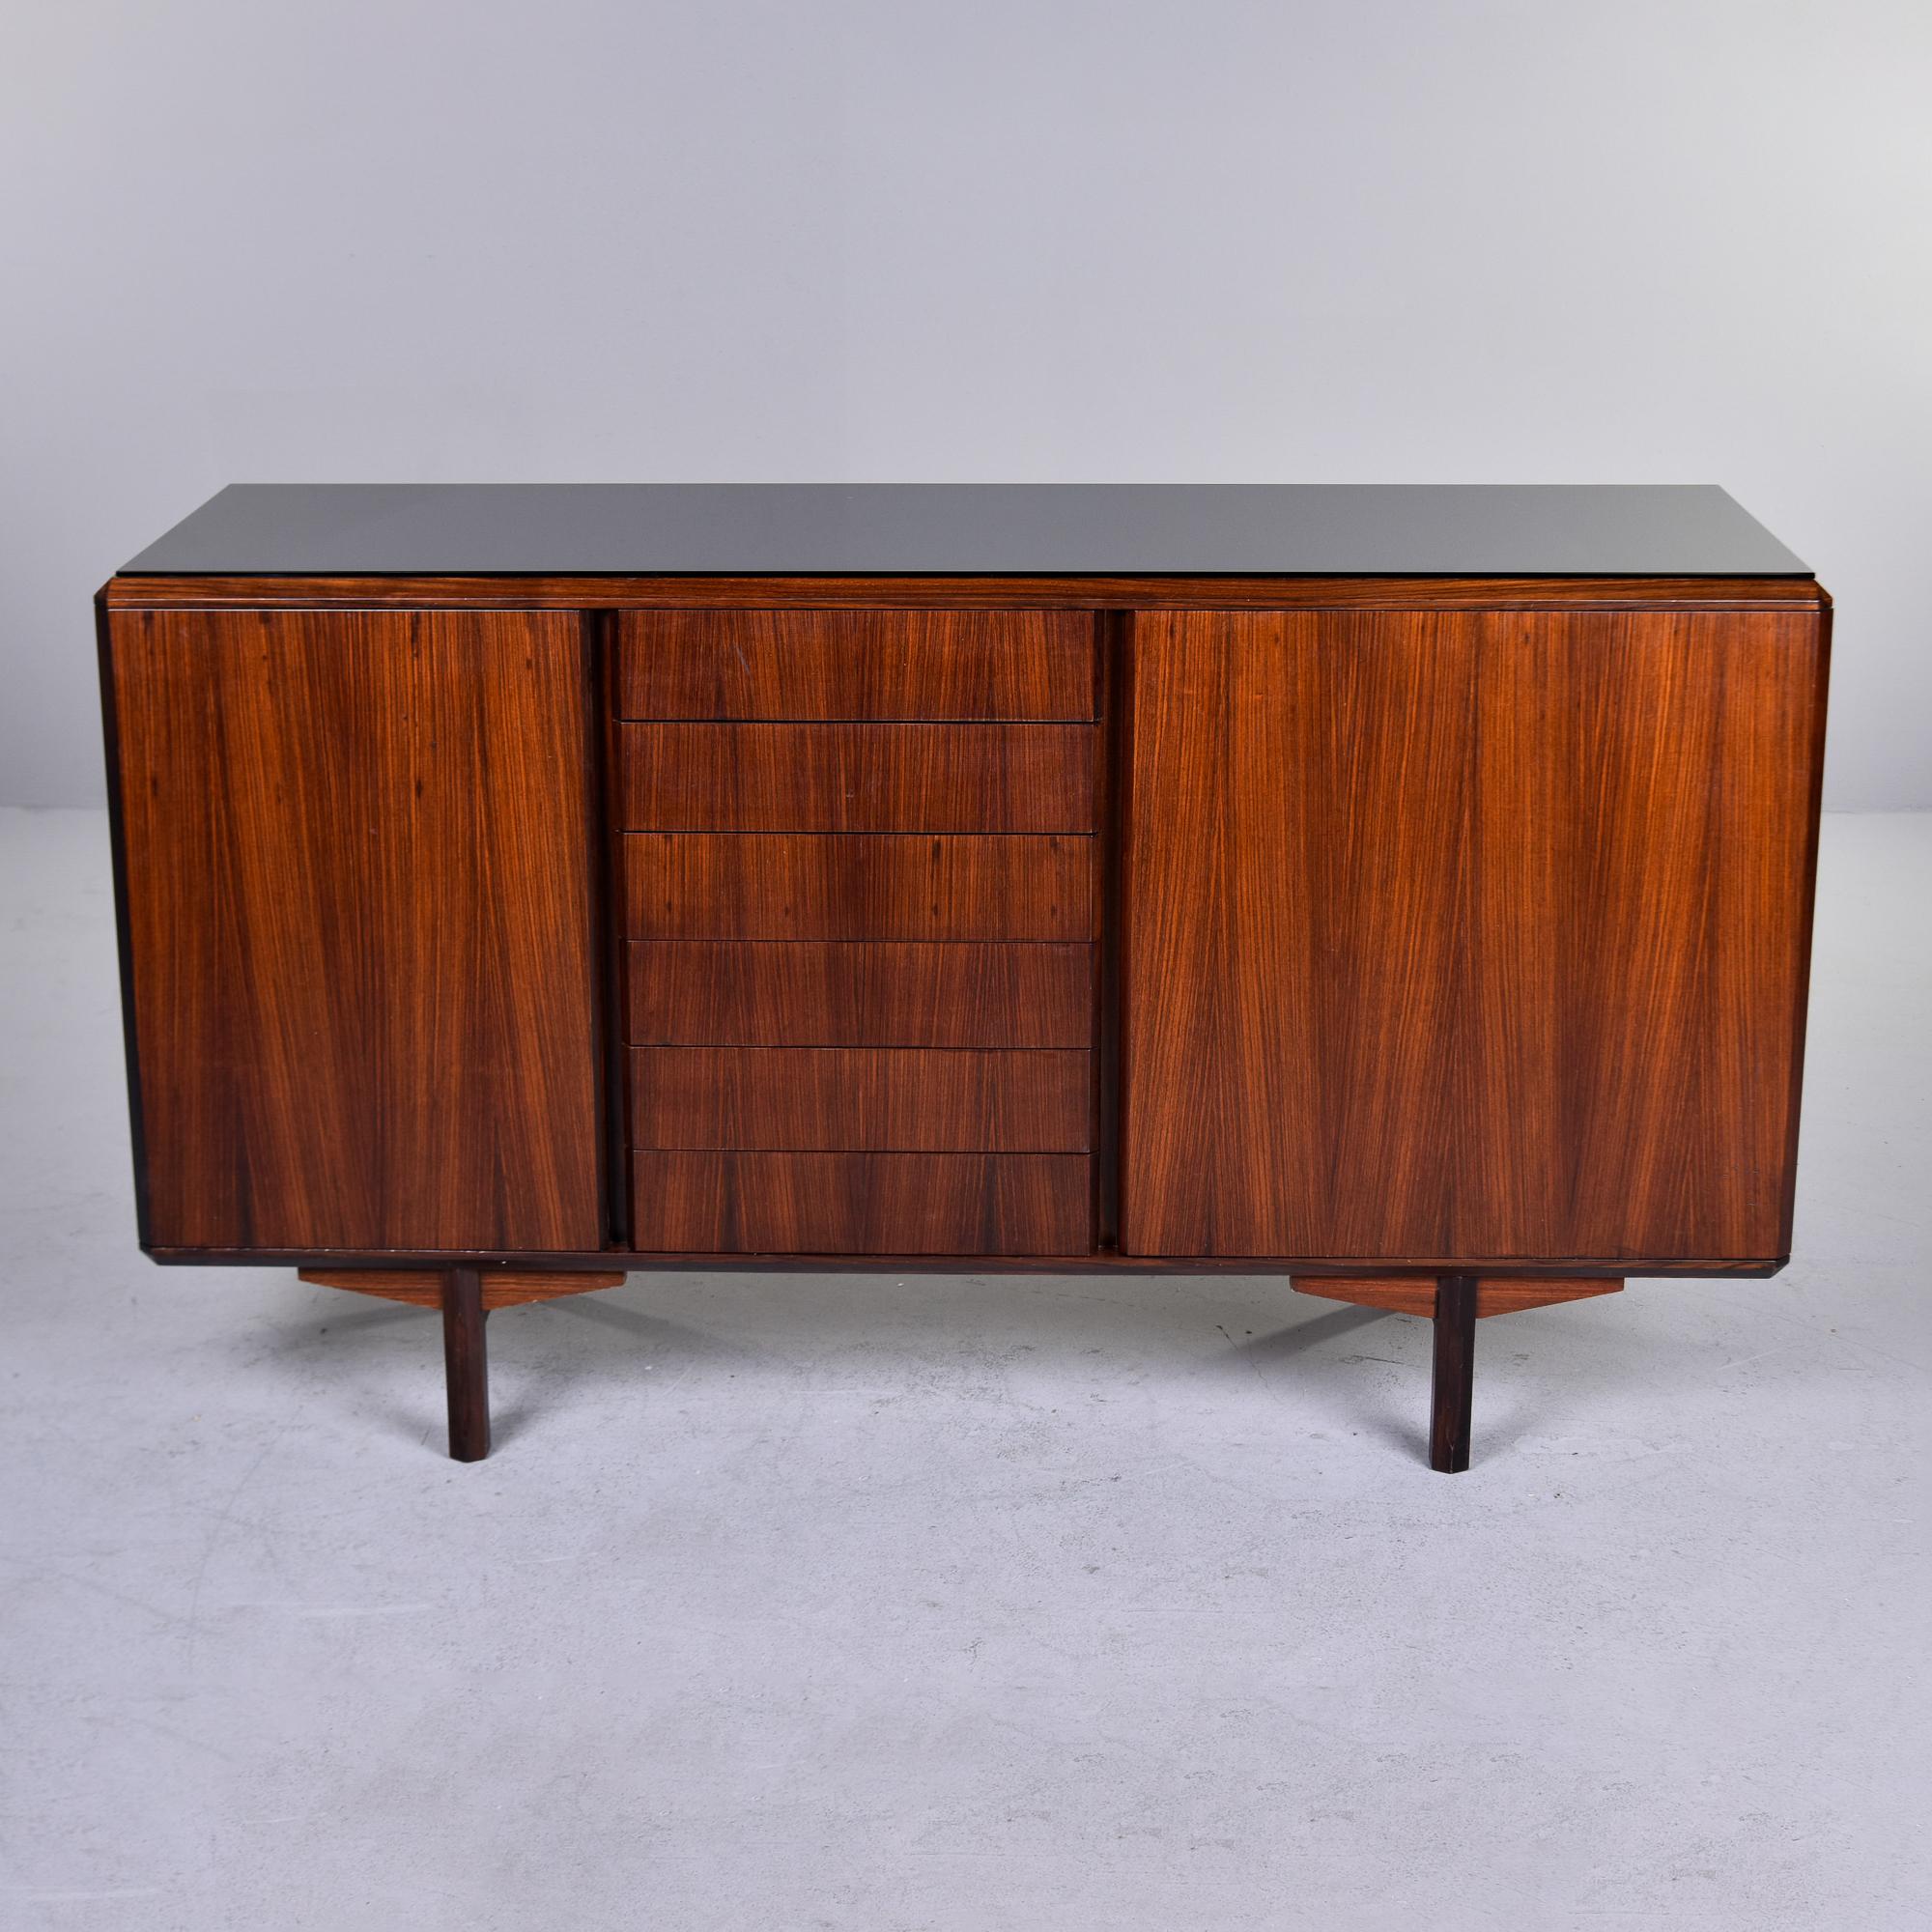 Found in Italy, this circa 1960s cabinet has a distinct mid century shape and nicely figured walnut. This is a practical and versatile cabinet. Six functional center drawers are flanked by side compartments with hinged doors and a single interior